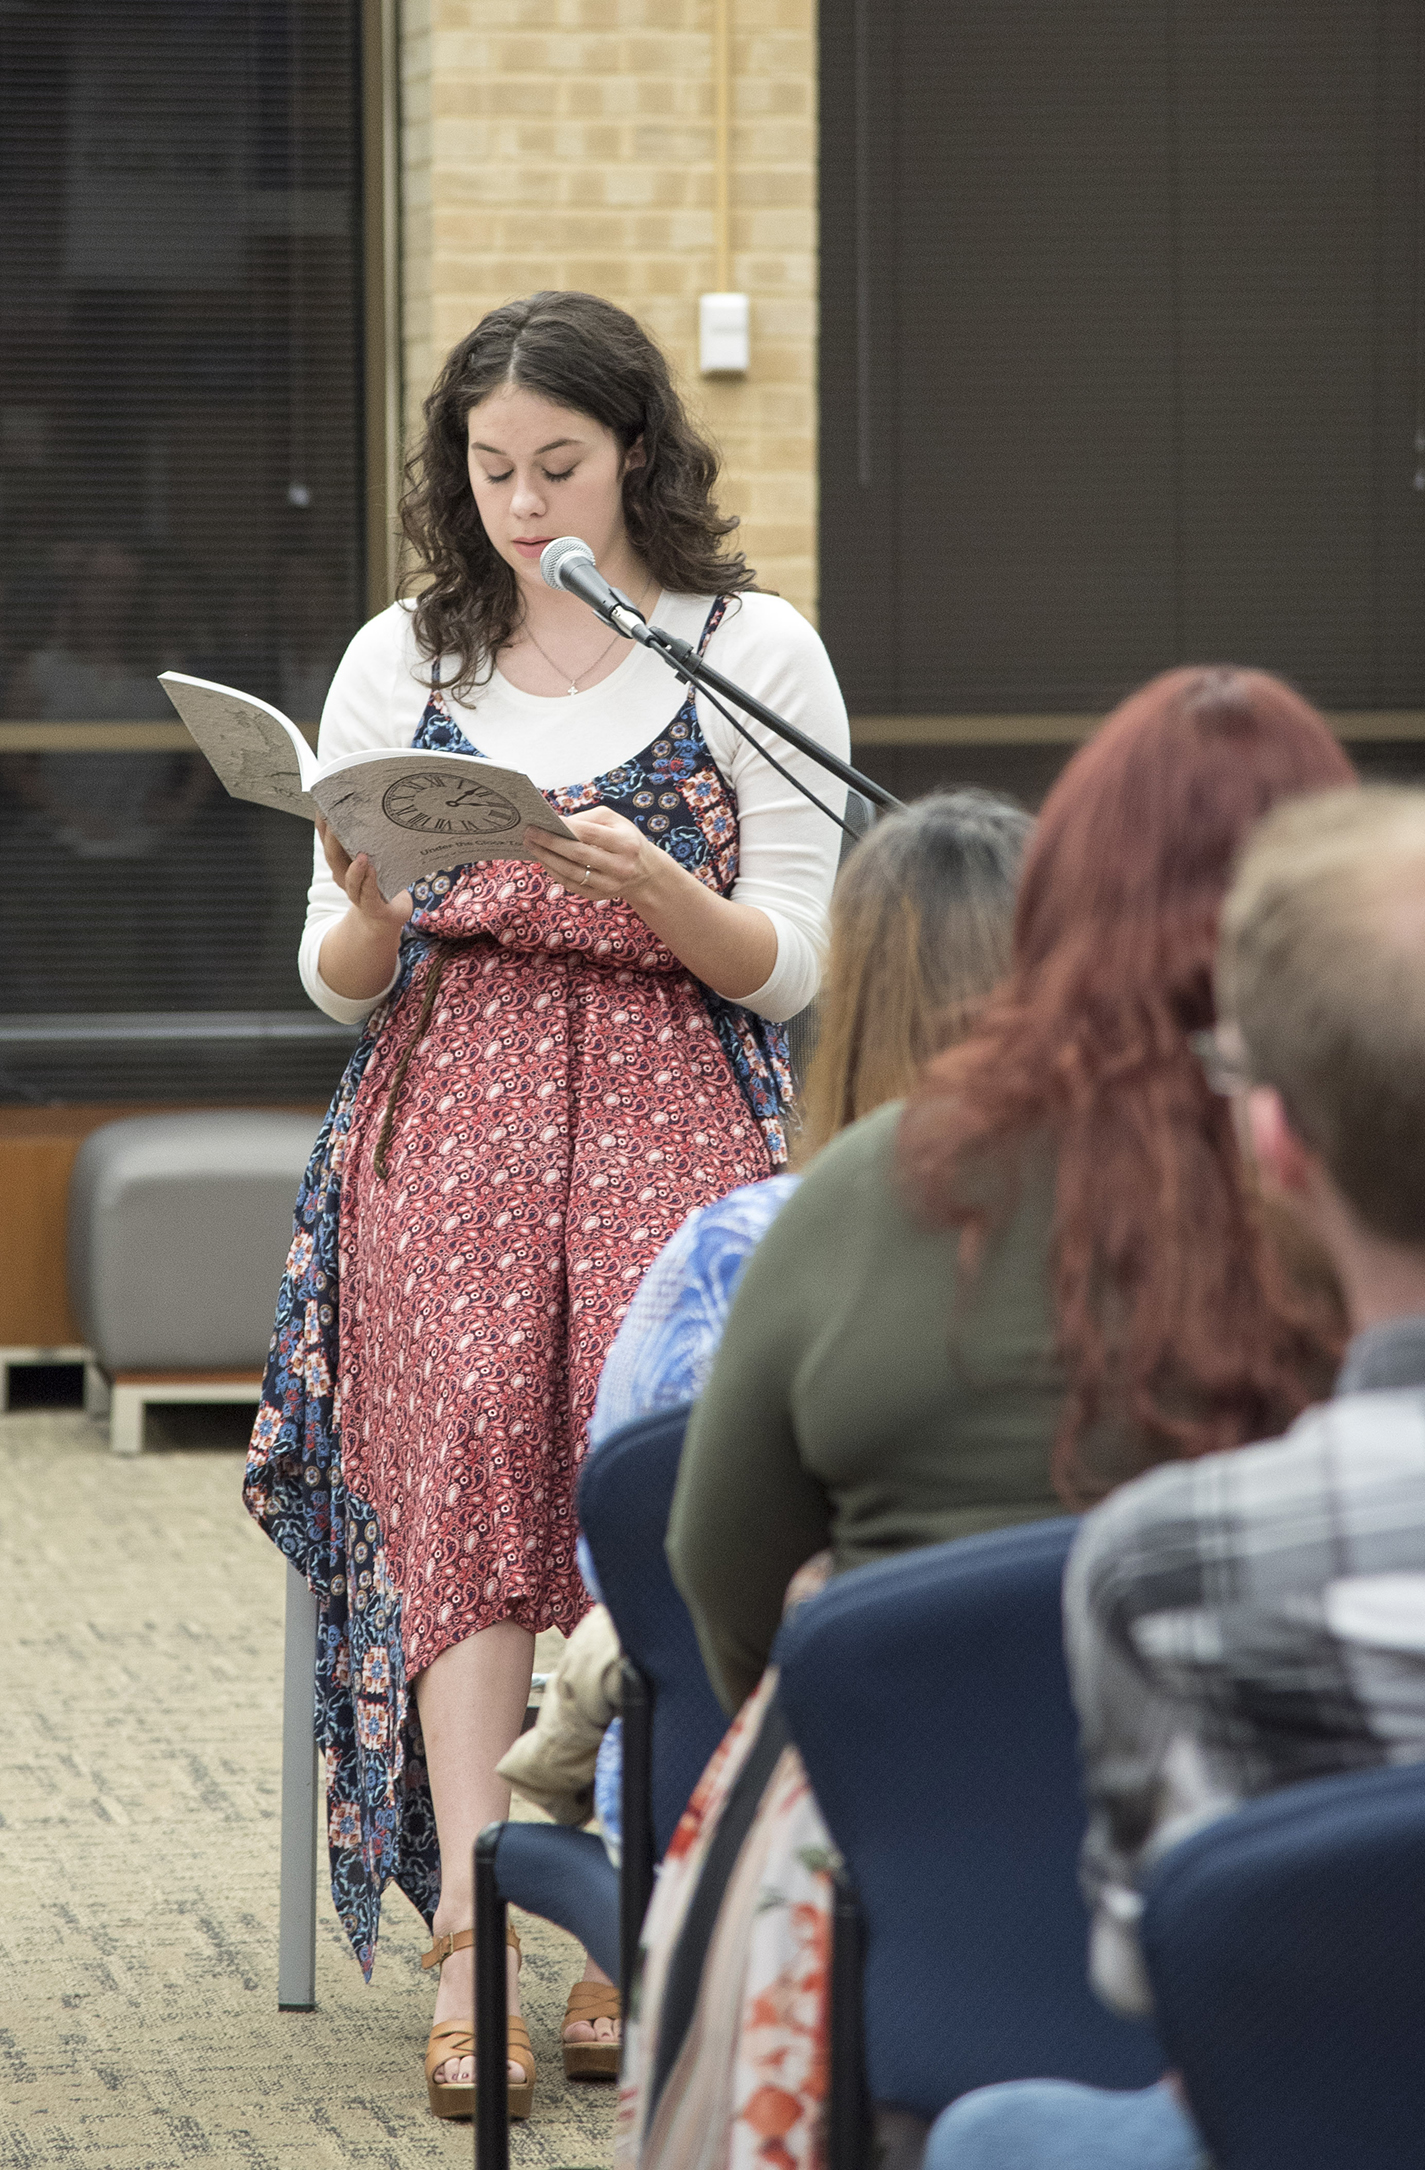 Winner Hannah Daniel reads her poem Four Summers with Ferris which is published in the journal. Right: English associate professor Rebecca Balcarcel introduces contributors during the event.